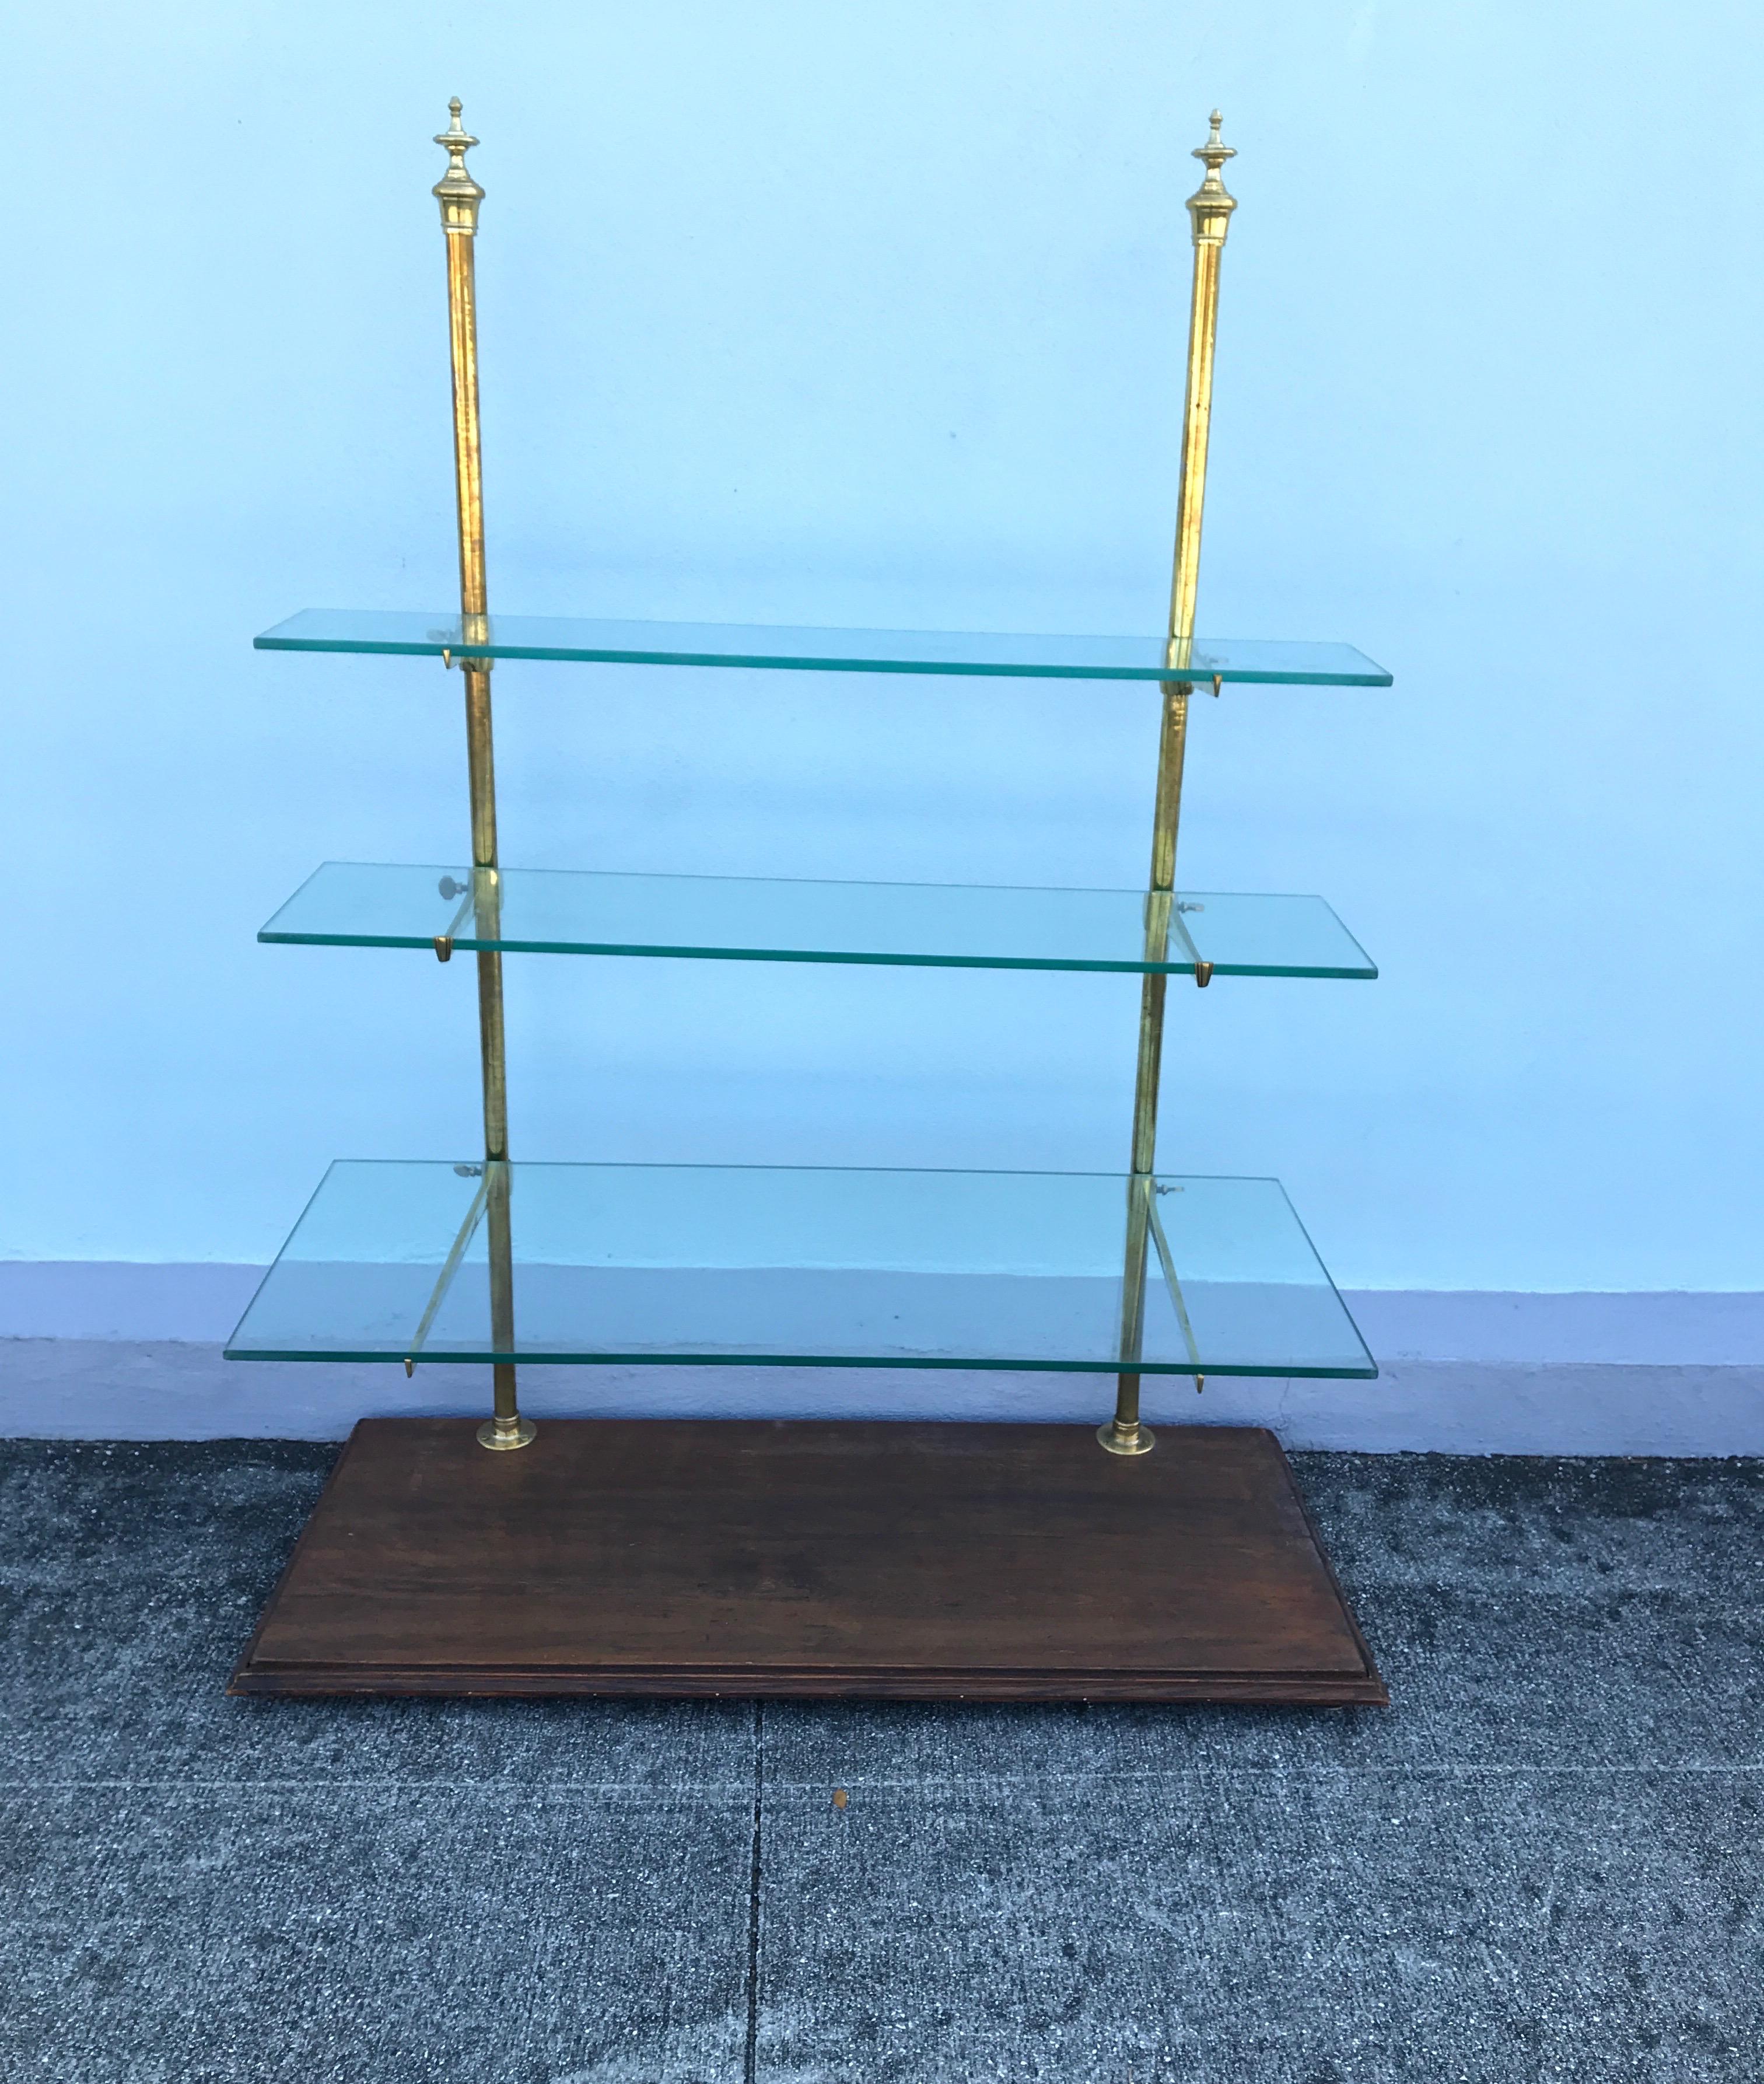 Antique French baker's display shelf with three graduated glass shelves with brass supports on a wooden platform. Shelves are 6